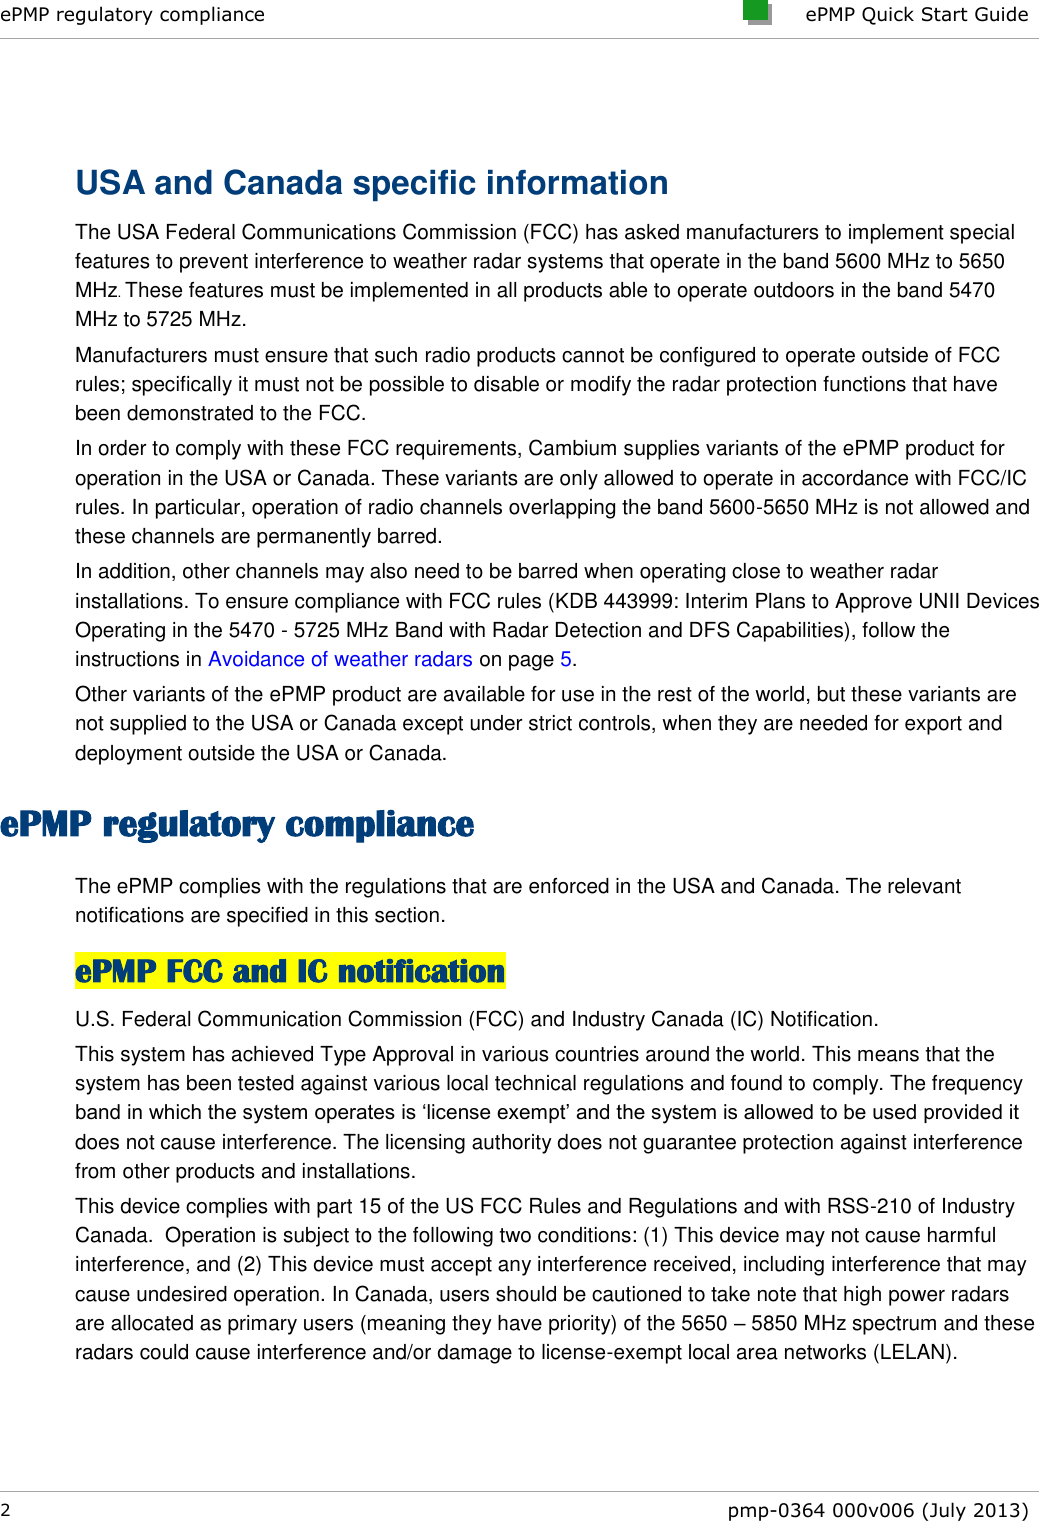 ePMP regulatory compliance     ePMP Quick Start Guide  2  pmp-0364 000v006 (July 2013)   USA and Canada specific information The USA Federal Communications Commission (FCC) has asked manufacturers to implement special features to prevent interference to weather radar systems that operate in the band 5600 MHz to 5650 MHz. These features must be implemented in all products able to operate outdoors in the band 5470 MHz to 5725 MHz. Manufacturers must ensure that such radio products cannot be configured to operate outside of FCC rules; specifically it must not be possible to disable or modify the radar protection functions that have been demonstrated to the FCC. In order to comply with these FCC requirements, Cambium supplies variants of the ePMP product for operation in the USA or Canada. These variants are only allowed to operate in accordance with FCC/IC rules. In particular, operation of radio channels overlapping the band 5600-5650 MHz is not allowed and these channels are permanently barred. In addition, other channels may also need to be barred when operating close to weather radar installations. To ensure compliance with FCC rules (KDB 443999: Interim Plans to Approve UNII Devices Operating in the 5470 - 5725 MHz Band with Radar Detection and DFS Capabilities), follow the instructions in Avoidance of weather radars on page 5. Other variants of the ePMP product are available for use in the rest of the world, but these variants are not supplied to the USA or Canada except under strict controls, when they are needed for export and deployment outside the USA or Canada. ePMP regulatory compliance The ePMP complies with the regulations that are enforced in the USA and Canada. The relevant notifications are specified in this section. ePMP FCC and IC notification U.S. Federal Communication Commission (FCC) and Industry Canada (IC) Notification. This system has achieved Type Approval in various countries around the world. This means that the system has been tested against various local technical regulations and found to comply. The frequency band in which the system operates is ‘license exempt’ and the system is allowed to be used provided it does not cause interference. The licensing authority does not guarantee protection against interference from other products and installations. This device complies with part 15 of the US FCC Rules and Regulations and with RSS-210 of Industry Canada.  Operation is subject to the following two conditions: (1) This device may not cause harmful interference, and (2) This device must accept any interference received, including interference that may cause undesired operation. In Canada, users should be cautioned to take note that high power radars are allocated as primary users (meaning they have priority) of the 5650 – 5850 MHz spectrum and these radars could cause interference and/or damage to license-exempt local area networks (LELAN). 